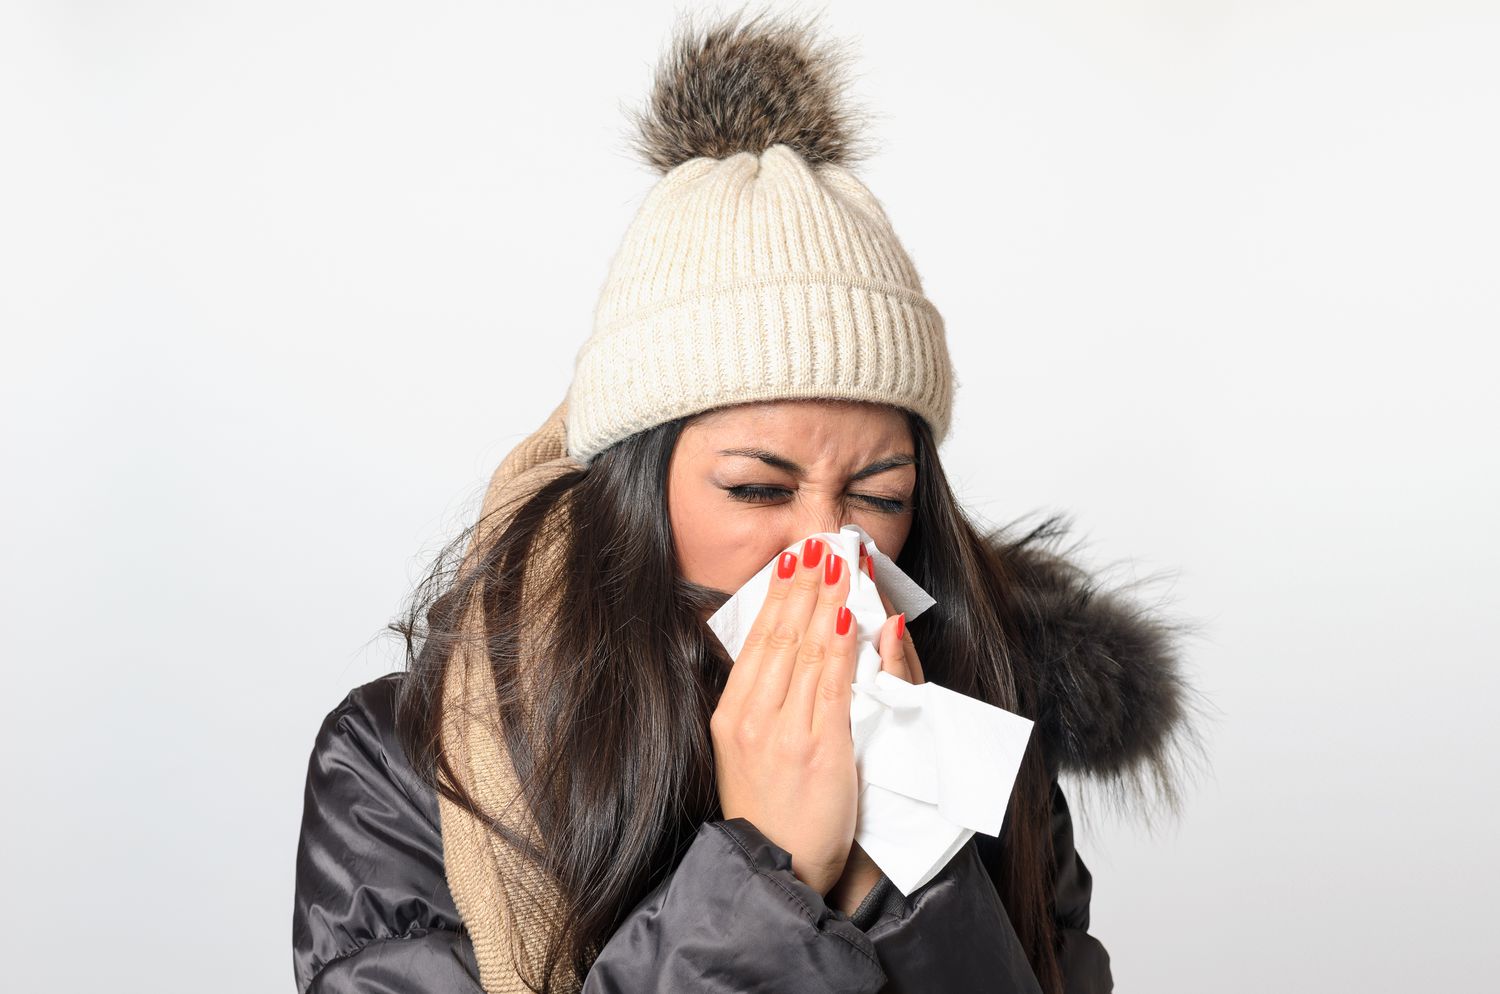 Young Woman In Warm Clothing Blowing Nose Against White Background